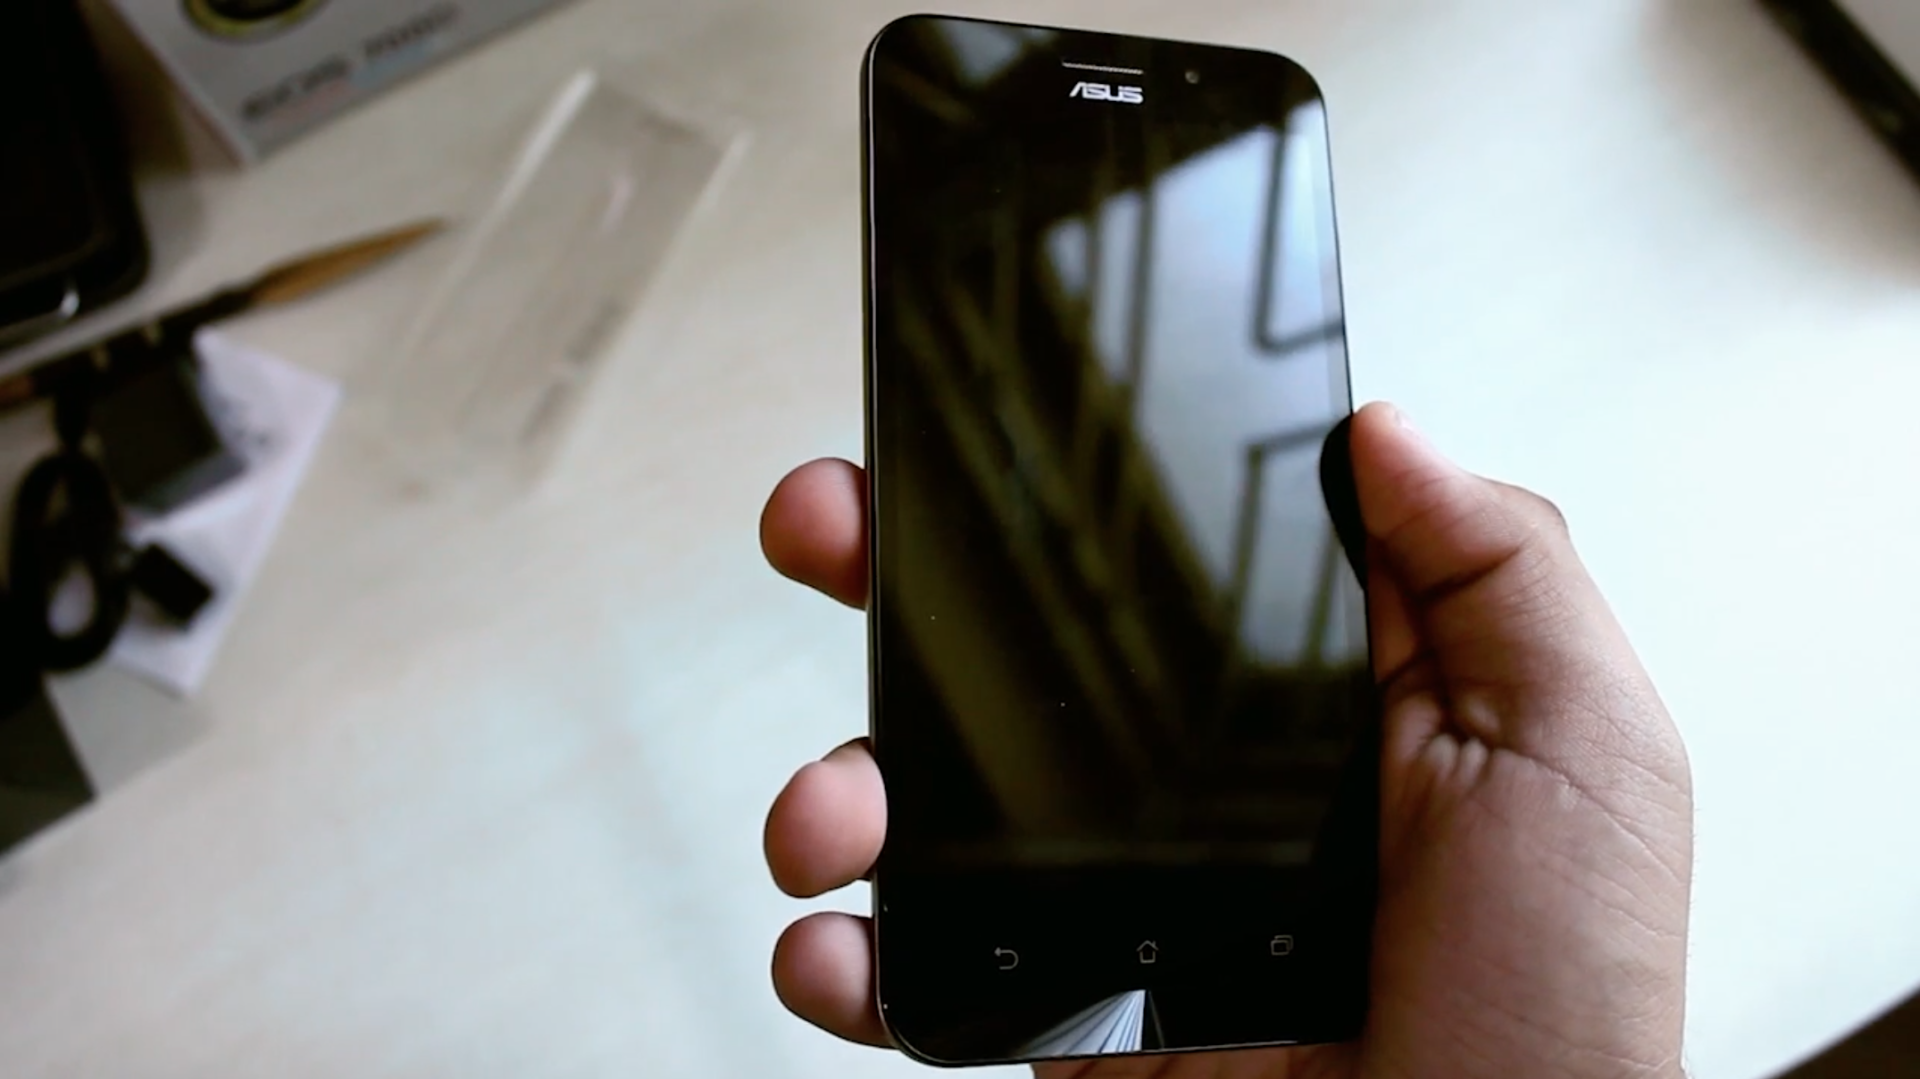 Asus Zenfone Max Indian Edition (upgraded version) front